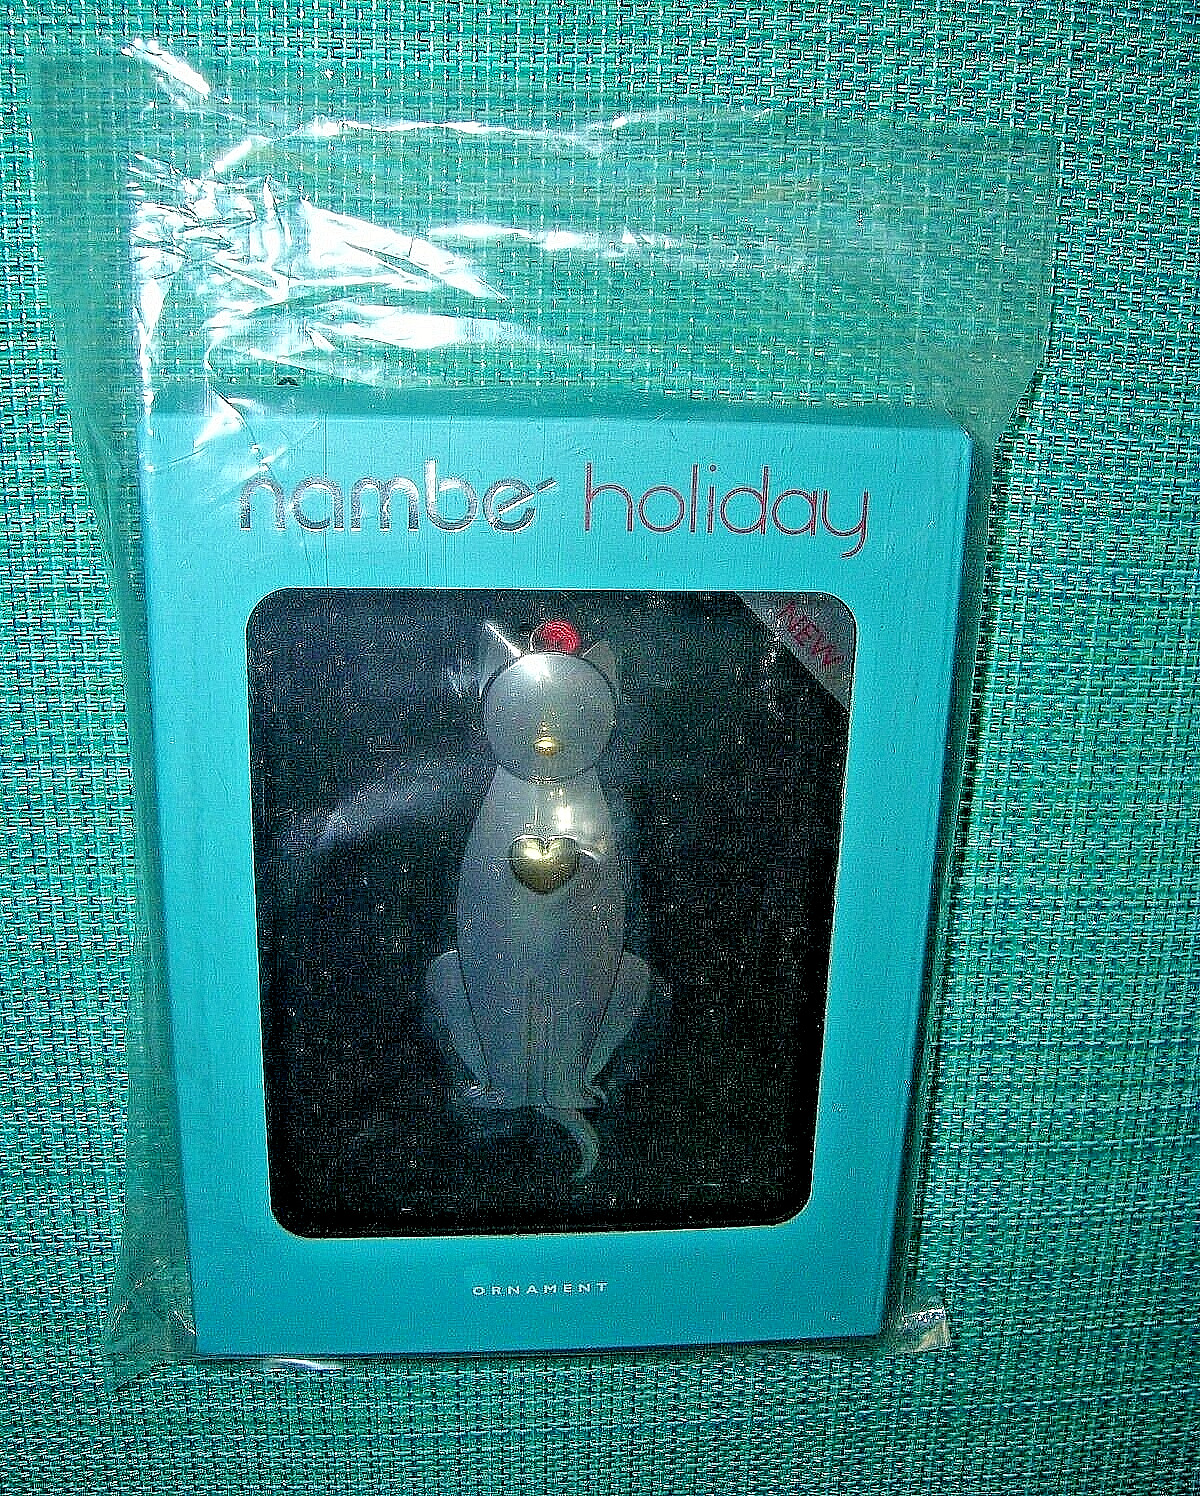 NEW Sealed Nambe Silver & Gold 4 Inch Hanging Holiday Cat Ornament  $39.99 List